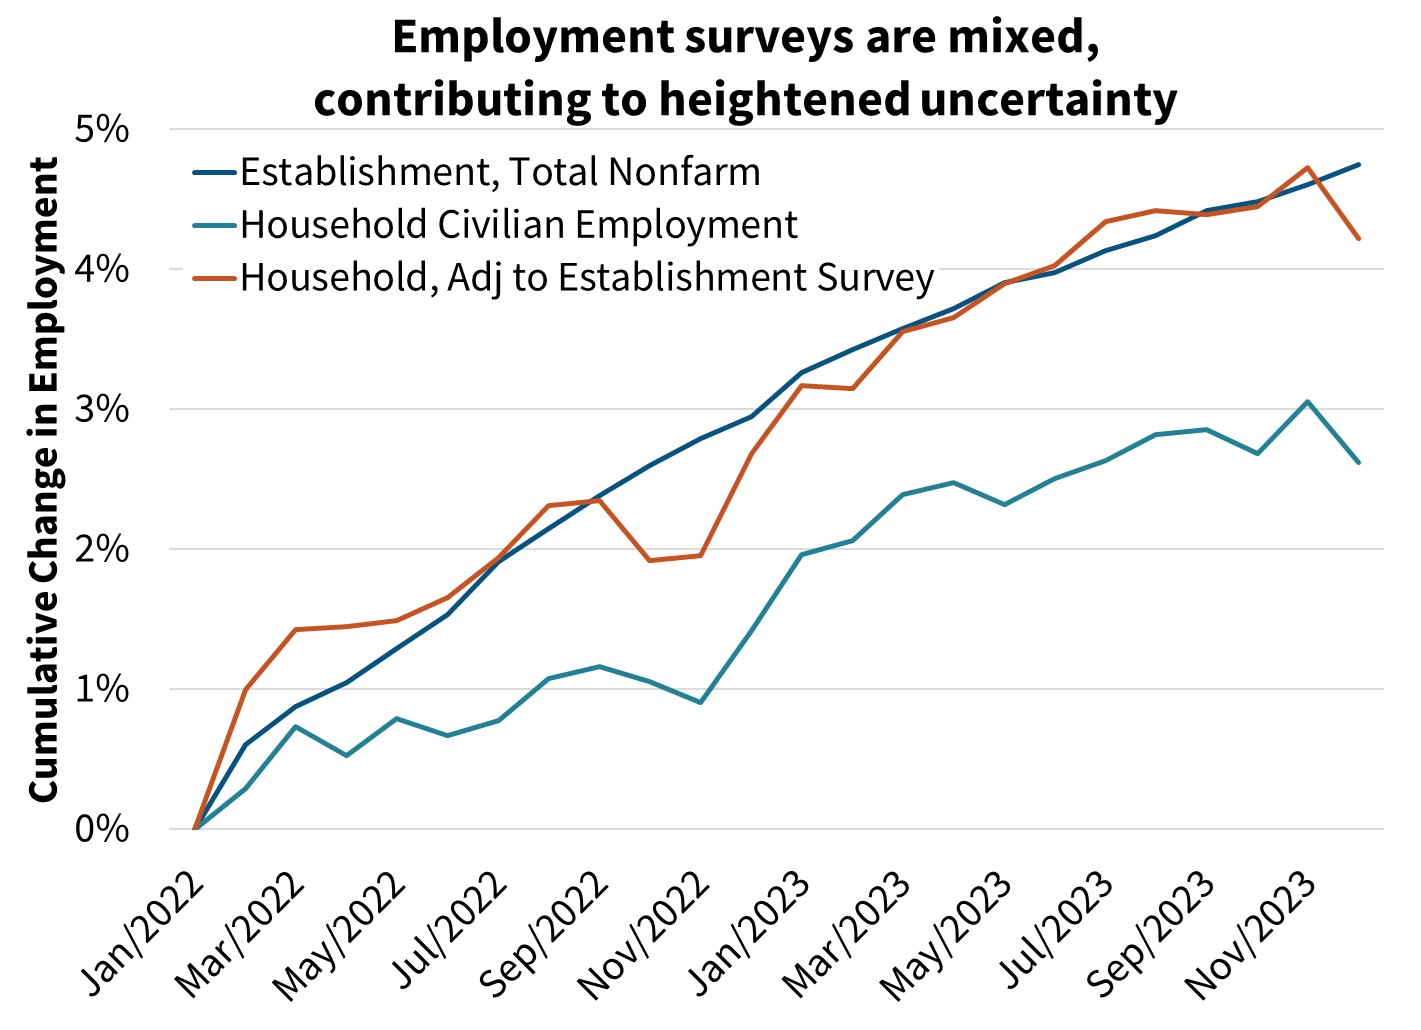 Employment surveys are mixed, contributing to heightened uncertainty